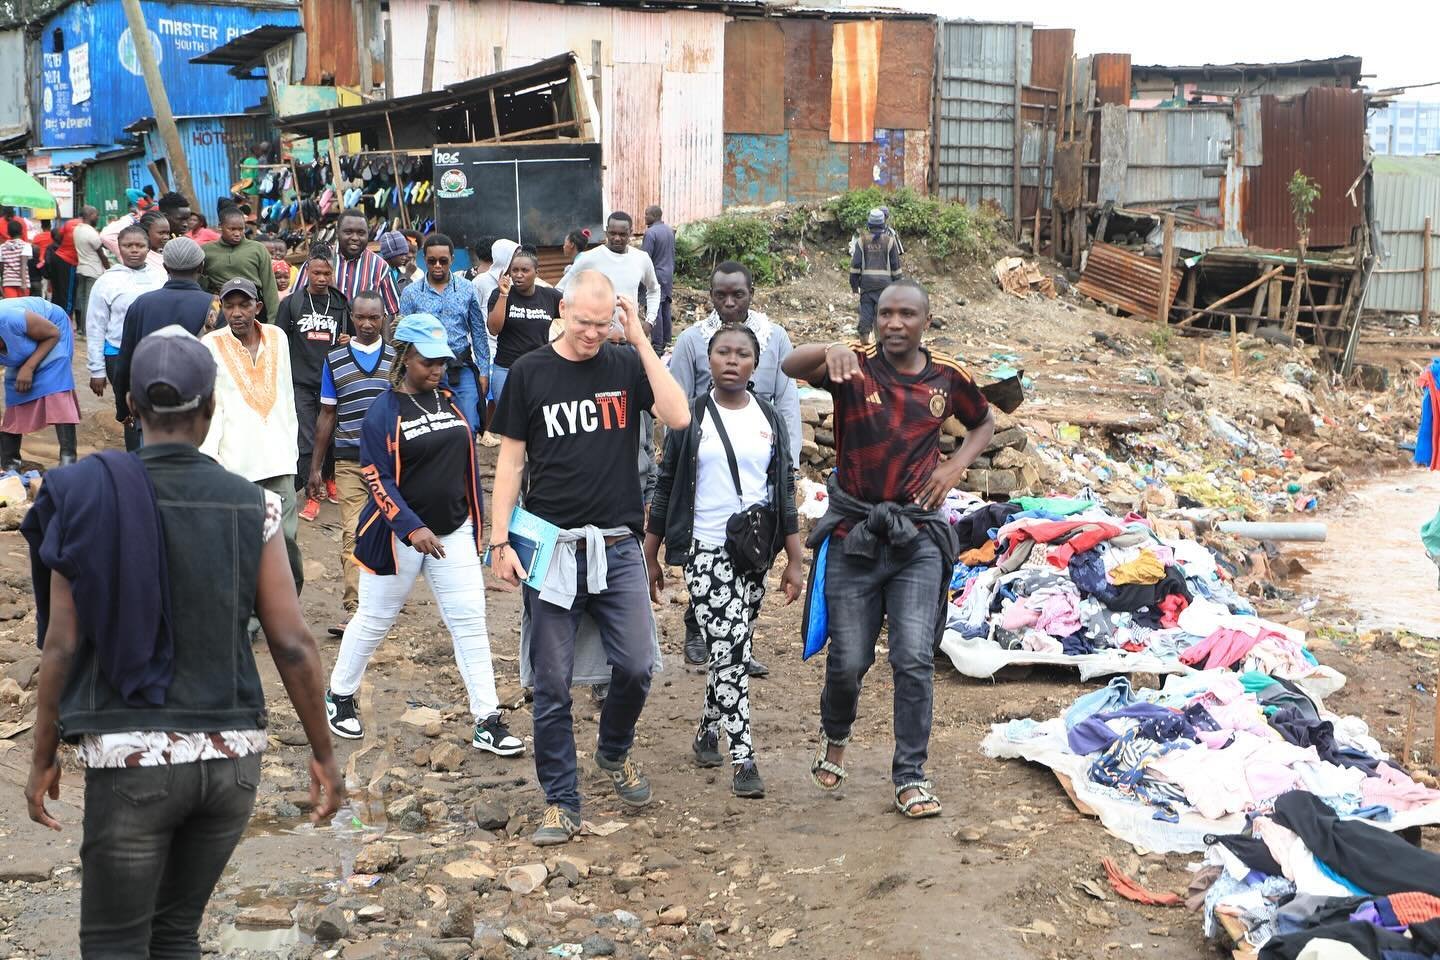 Flooding has significantly impacted our informal settlements. In response, we've conducted rapid enumeration of affected households along the Mathare River. 

Today's field visit, accompanied by Mikkel Harder, Partnerships Manager from @sdi_net . and